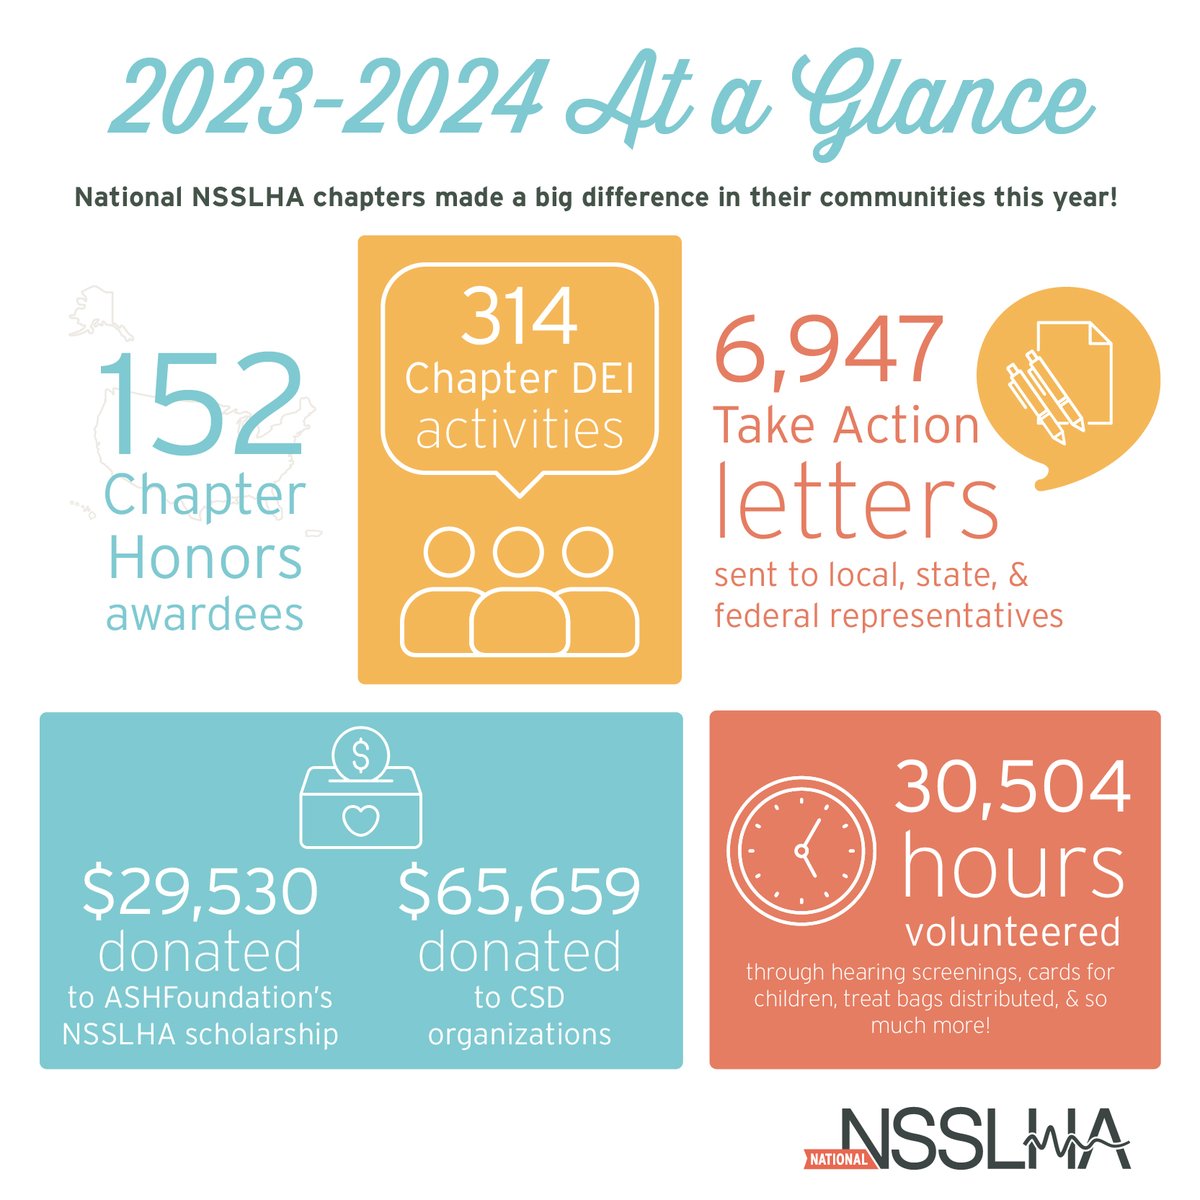 National NSSLHA chapters are making waves! This year's highlights: 30,504 volunteer hours 314 DEI activities 6,947 letters to reps $29,530 scholarship donations $65,659 to CSD orgs 152 Chapter Honors recipients Their commitment drives change in the CSD community. #slp2b #aud2b